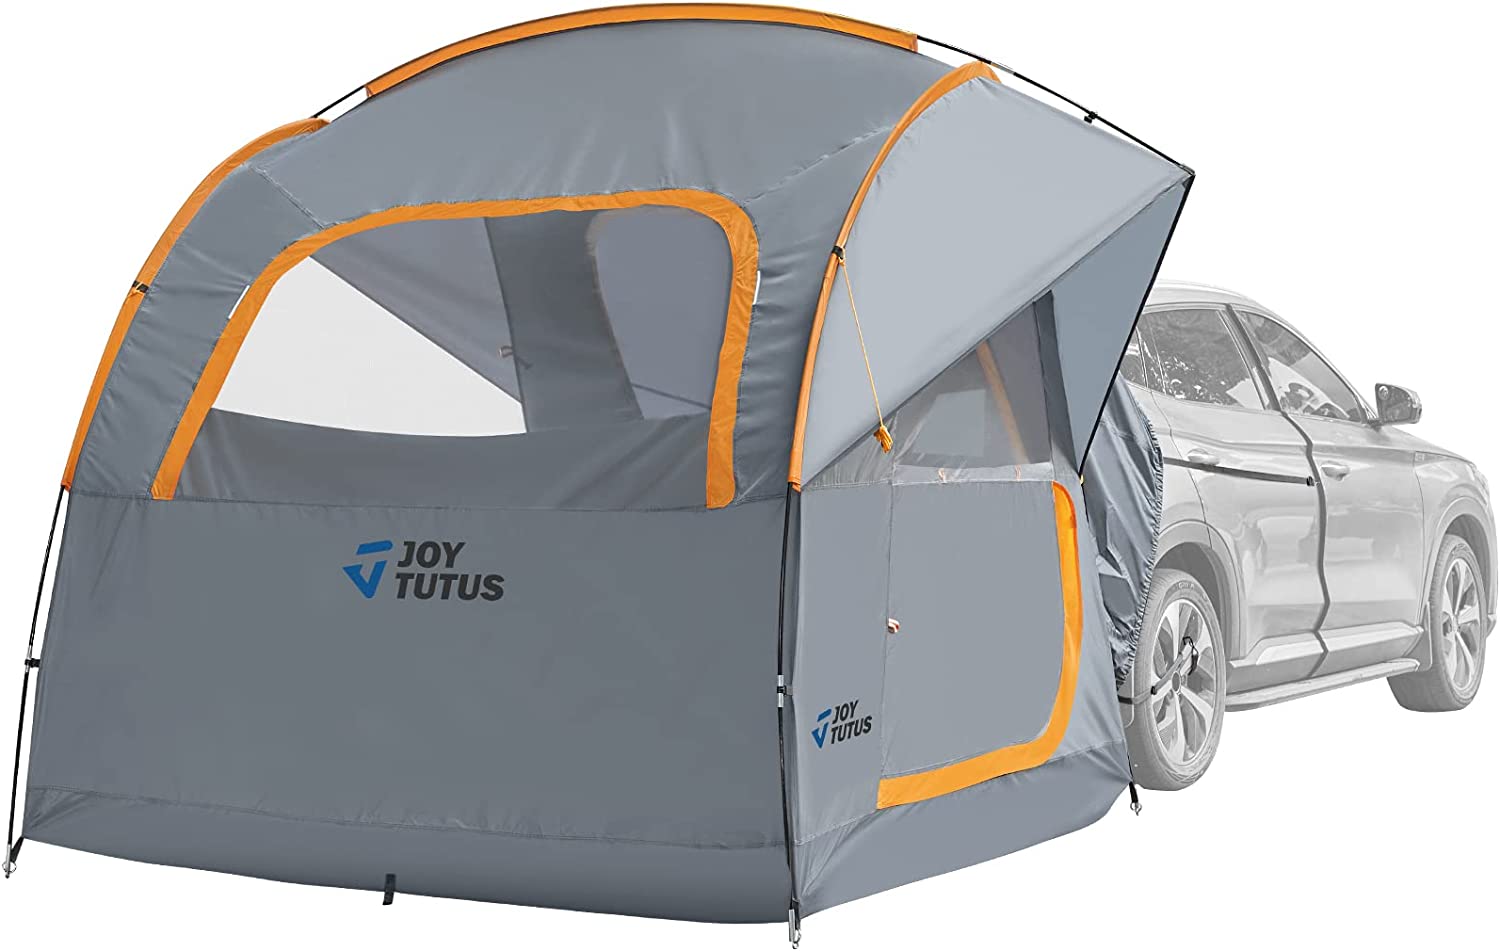 JOYTUTUS SUV Tent for Camping, Double Door Design, Waterproof PU2000mm Double Layer for 6-8 Person, Camping Outdoor Travel Preferred, 7.7′ W x 7.7′ L x 6.9′ H